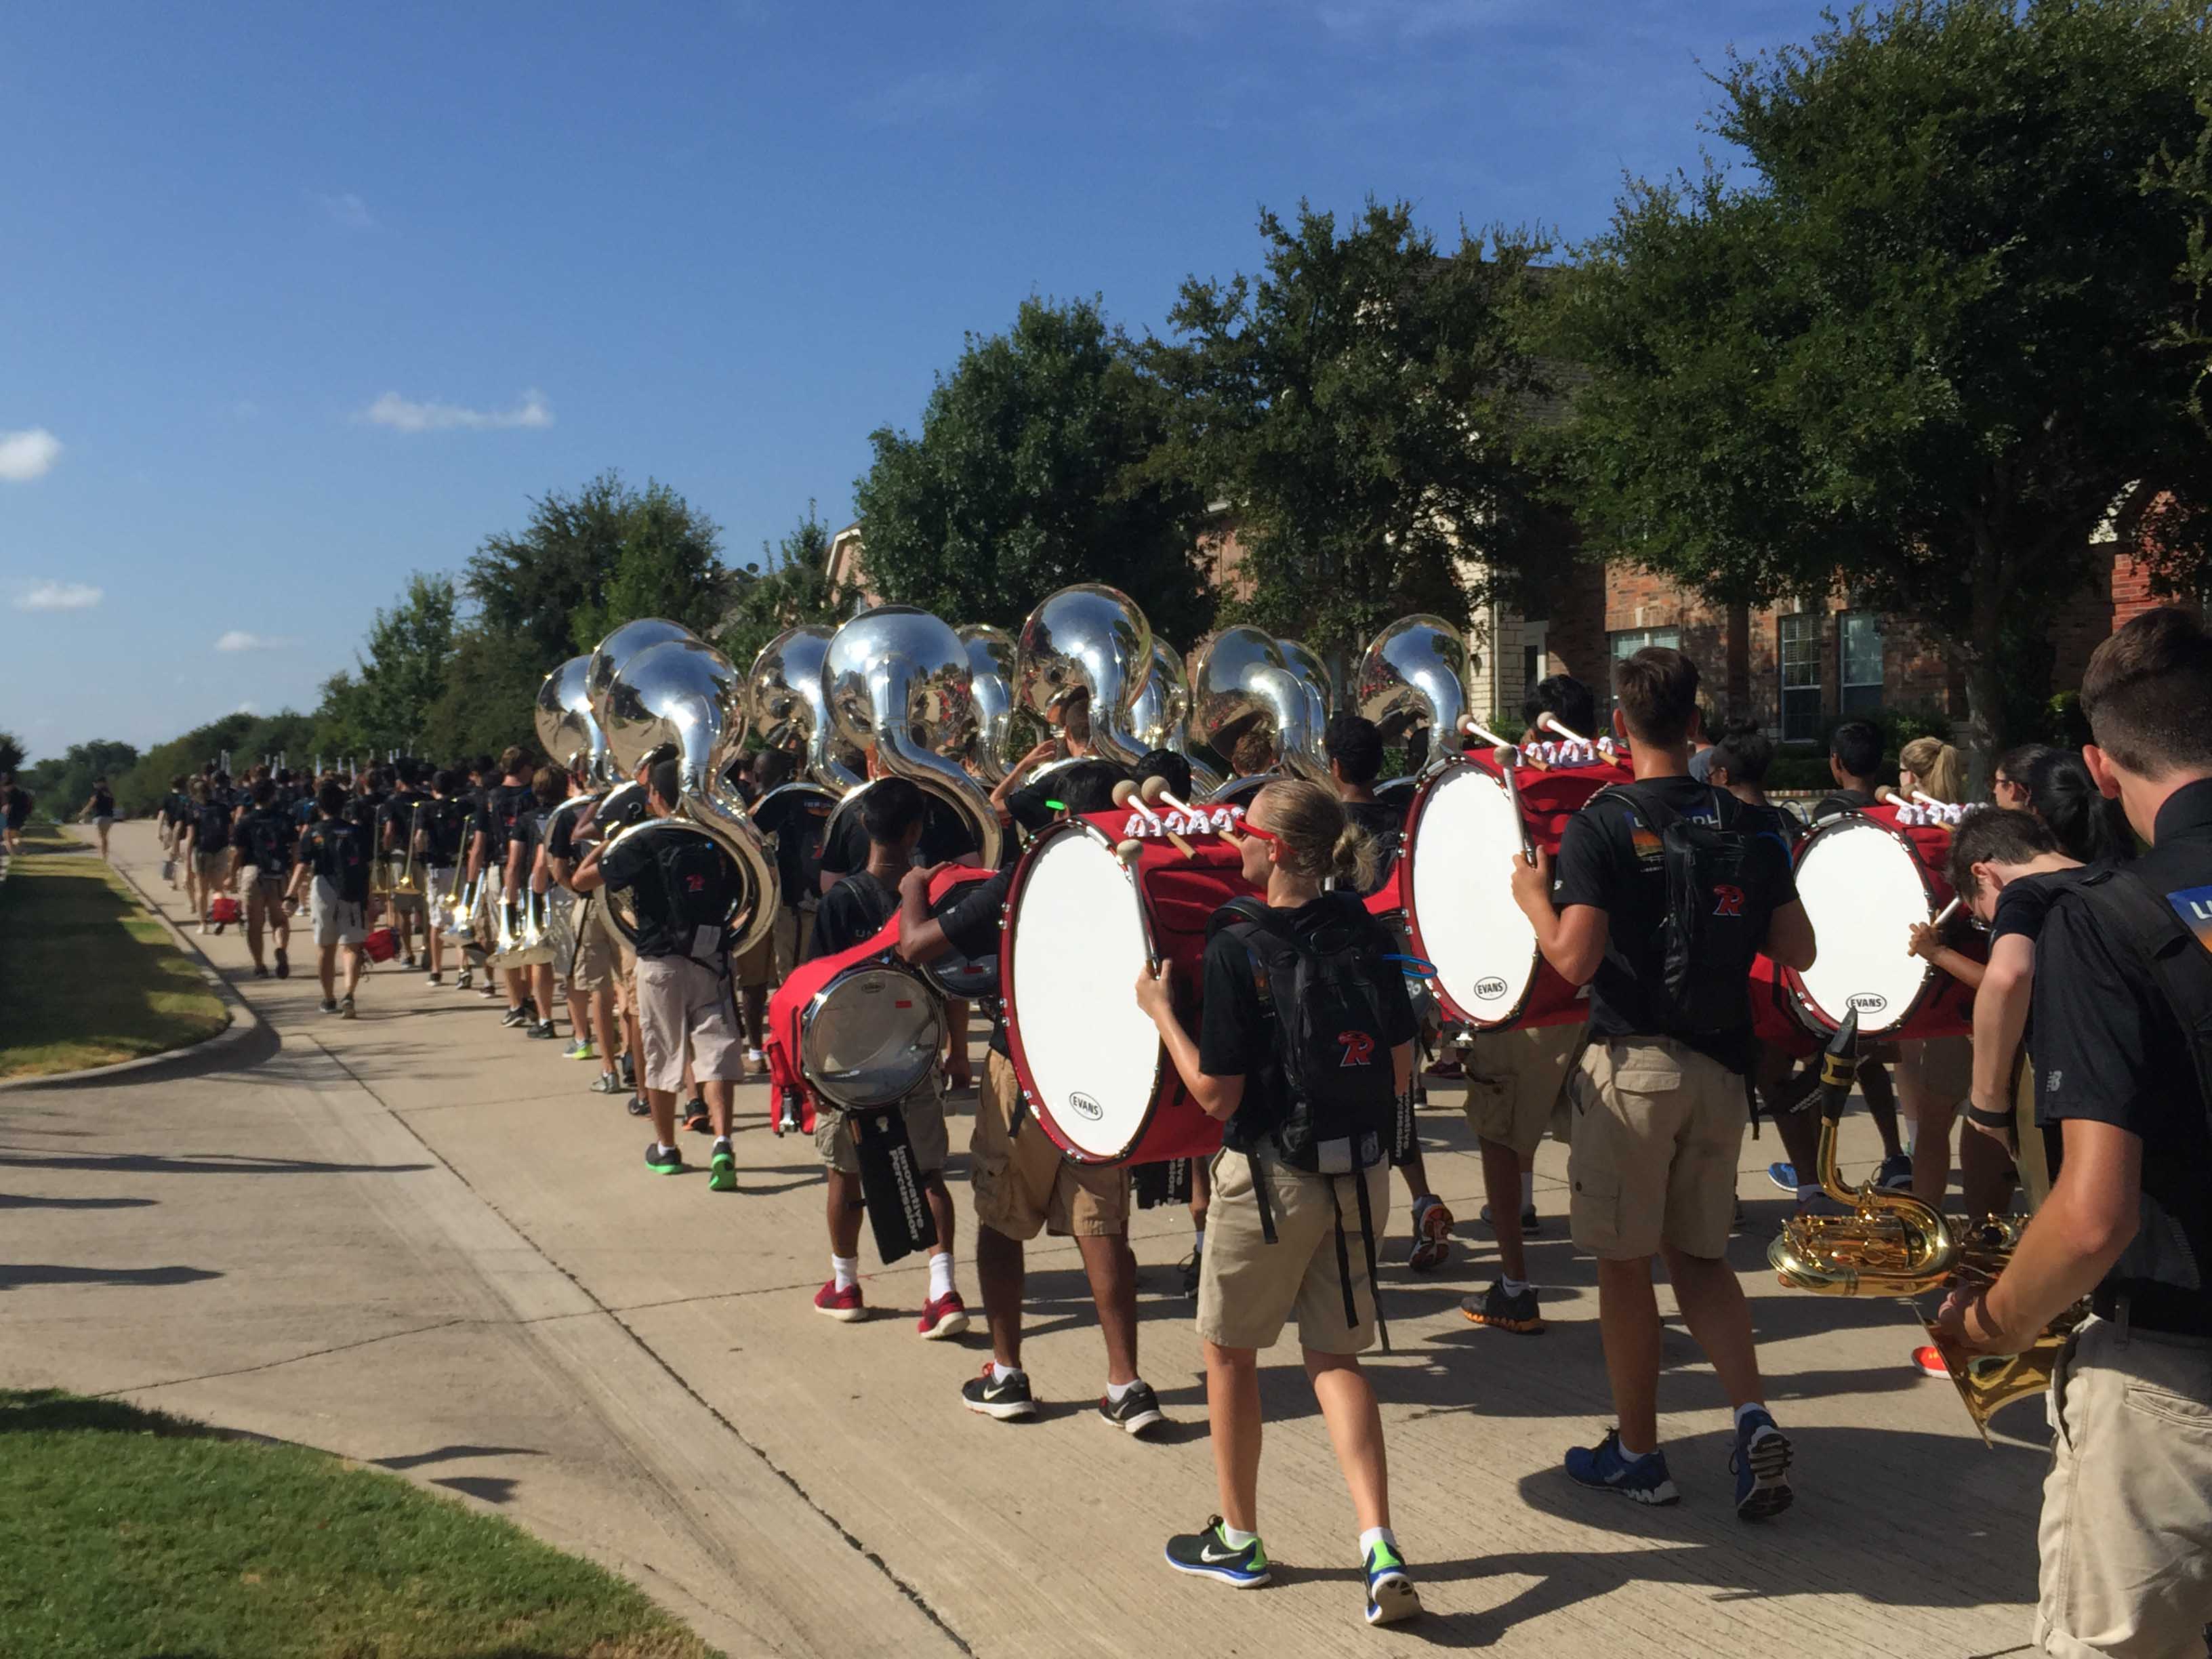 The band marched through the neighborhoods and played show music and mini concerts hoping to raise money for the year. 